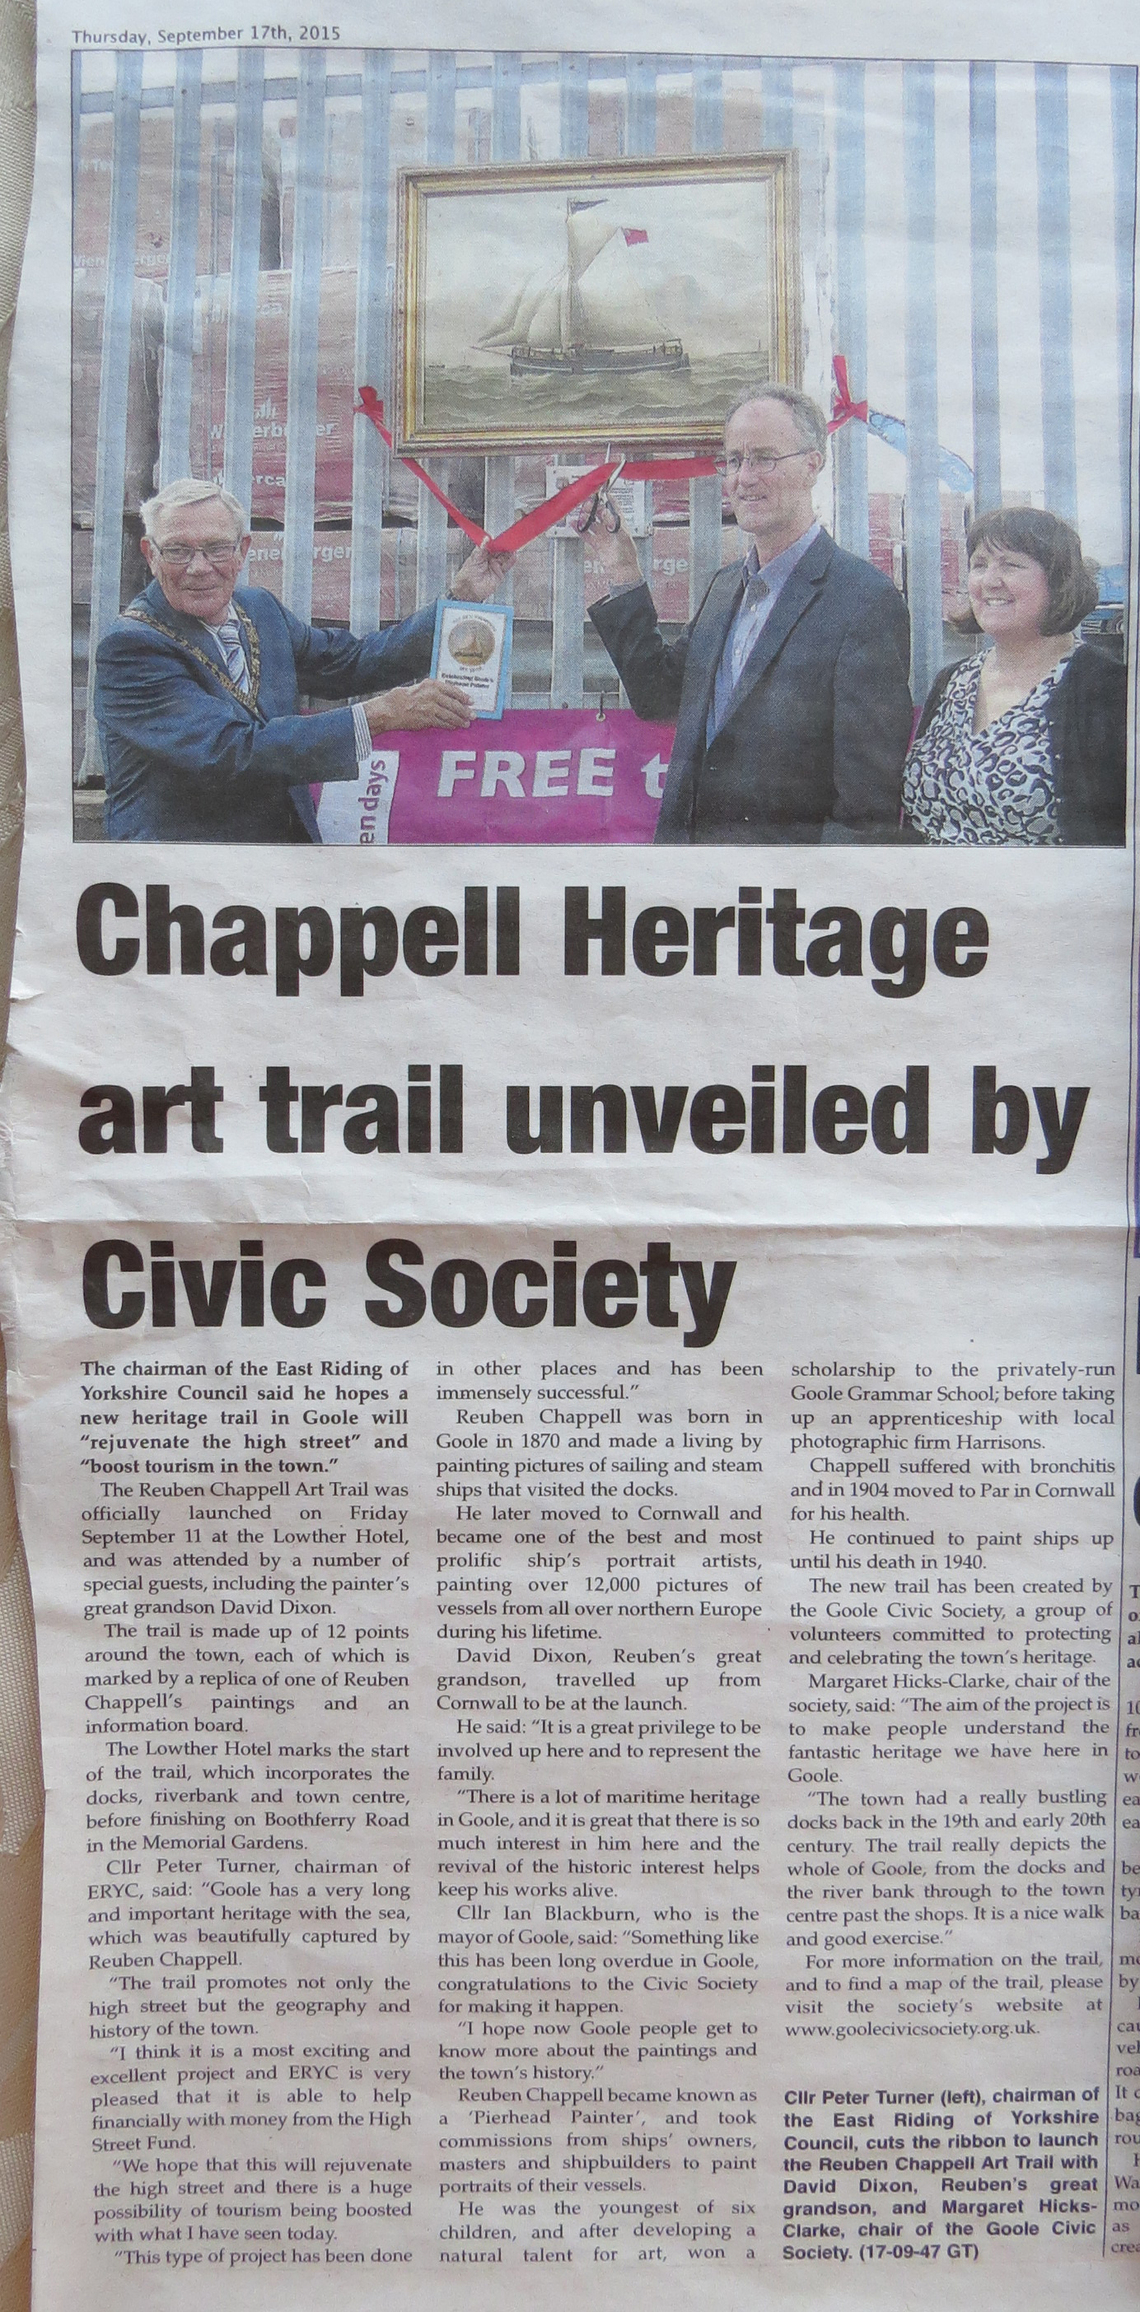 Launch of Reuben Chappell Art Trail reported in Goole Times